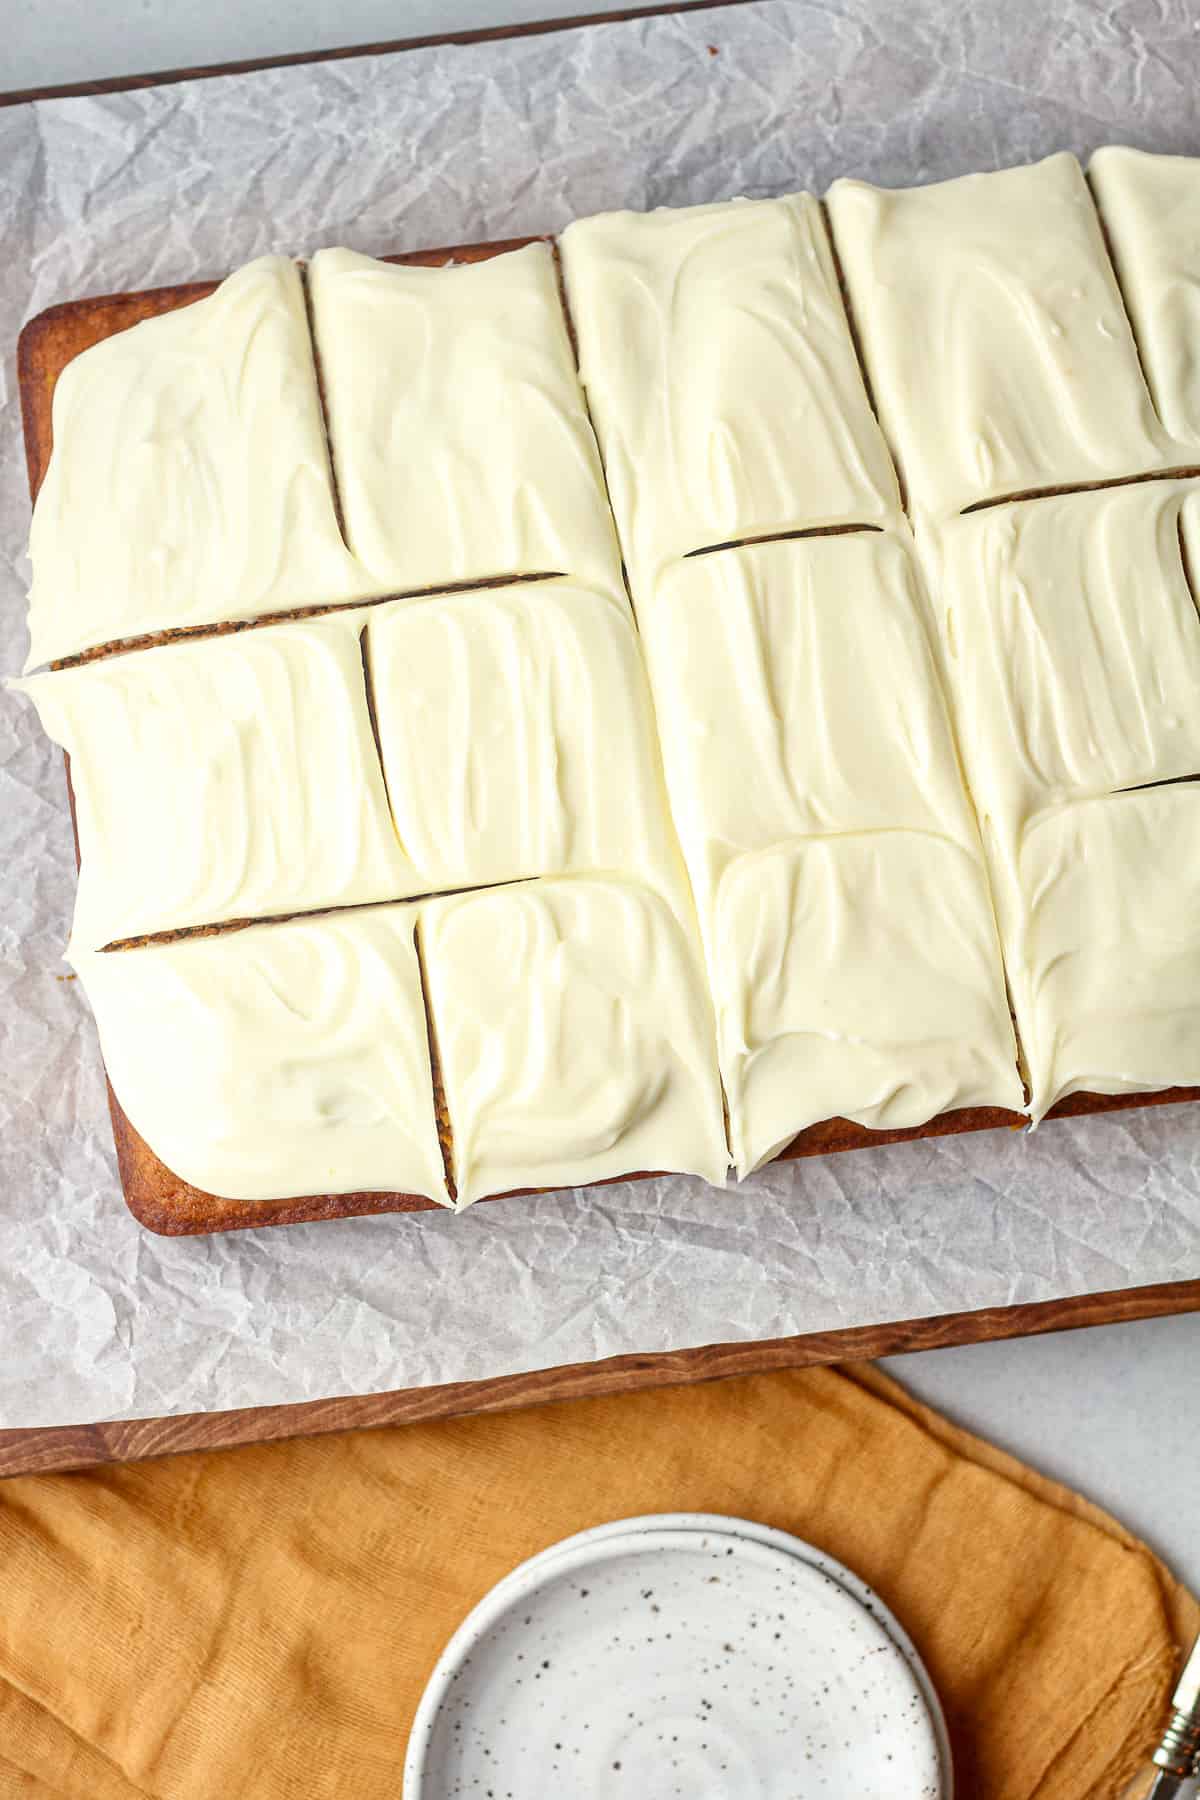 Overhead view of a sliced pumpkin cake with cream cheese frosting.